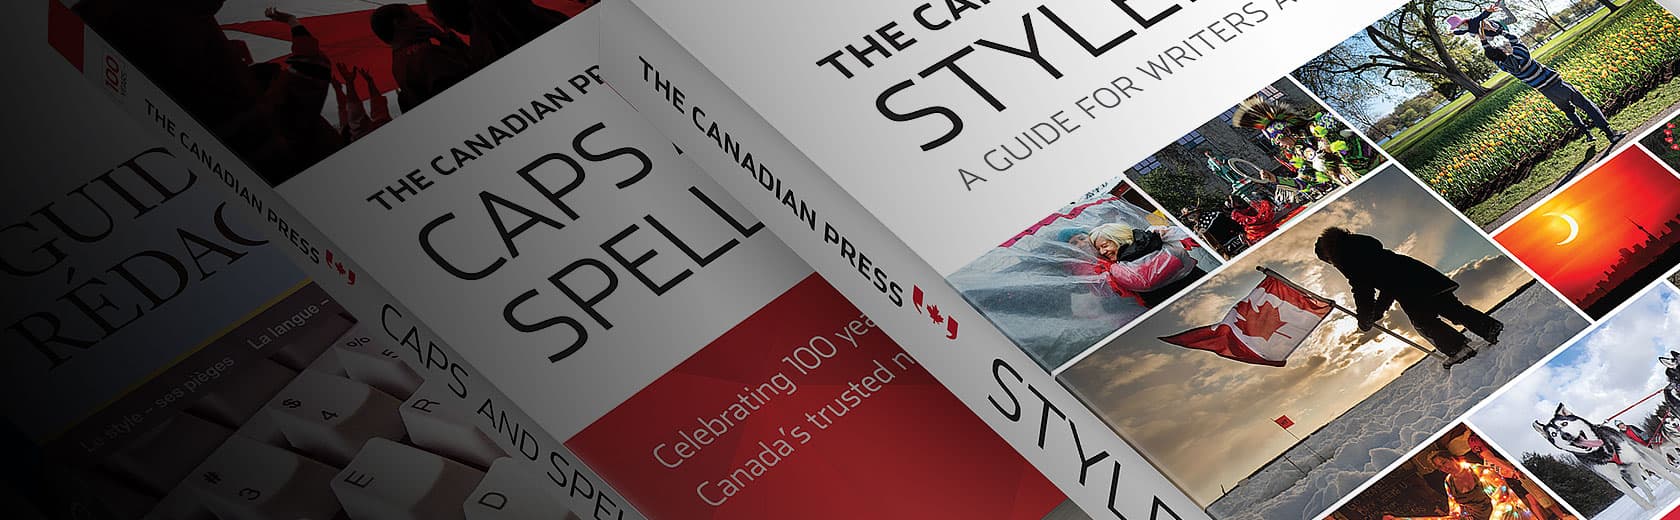 Online Stylebooks | The Canadian Press